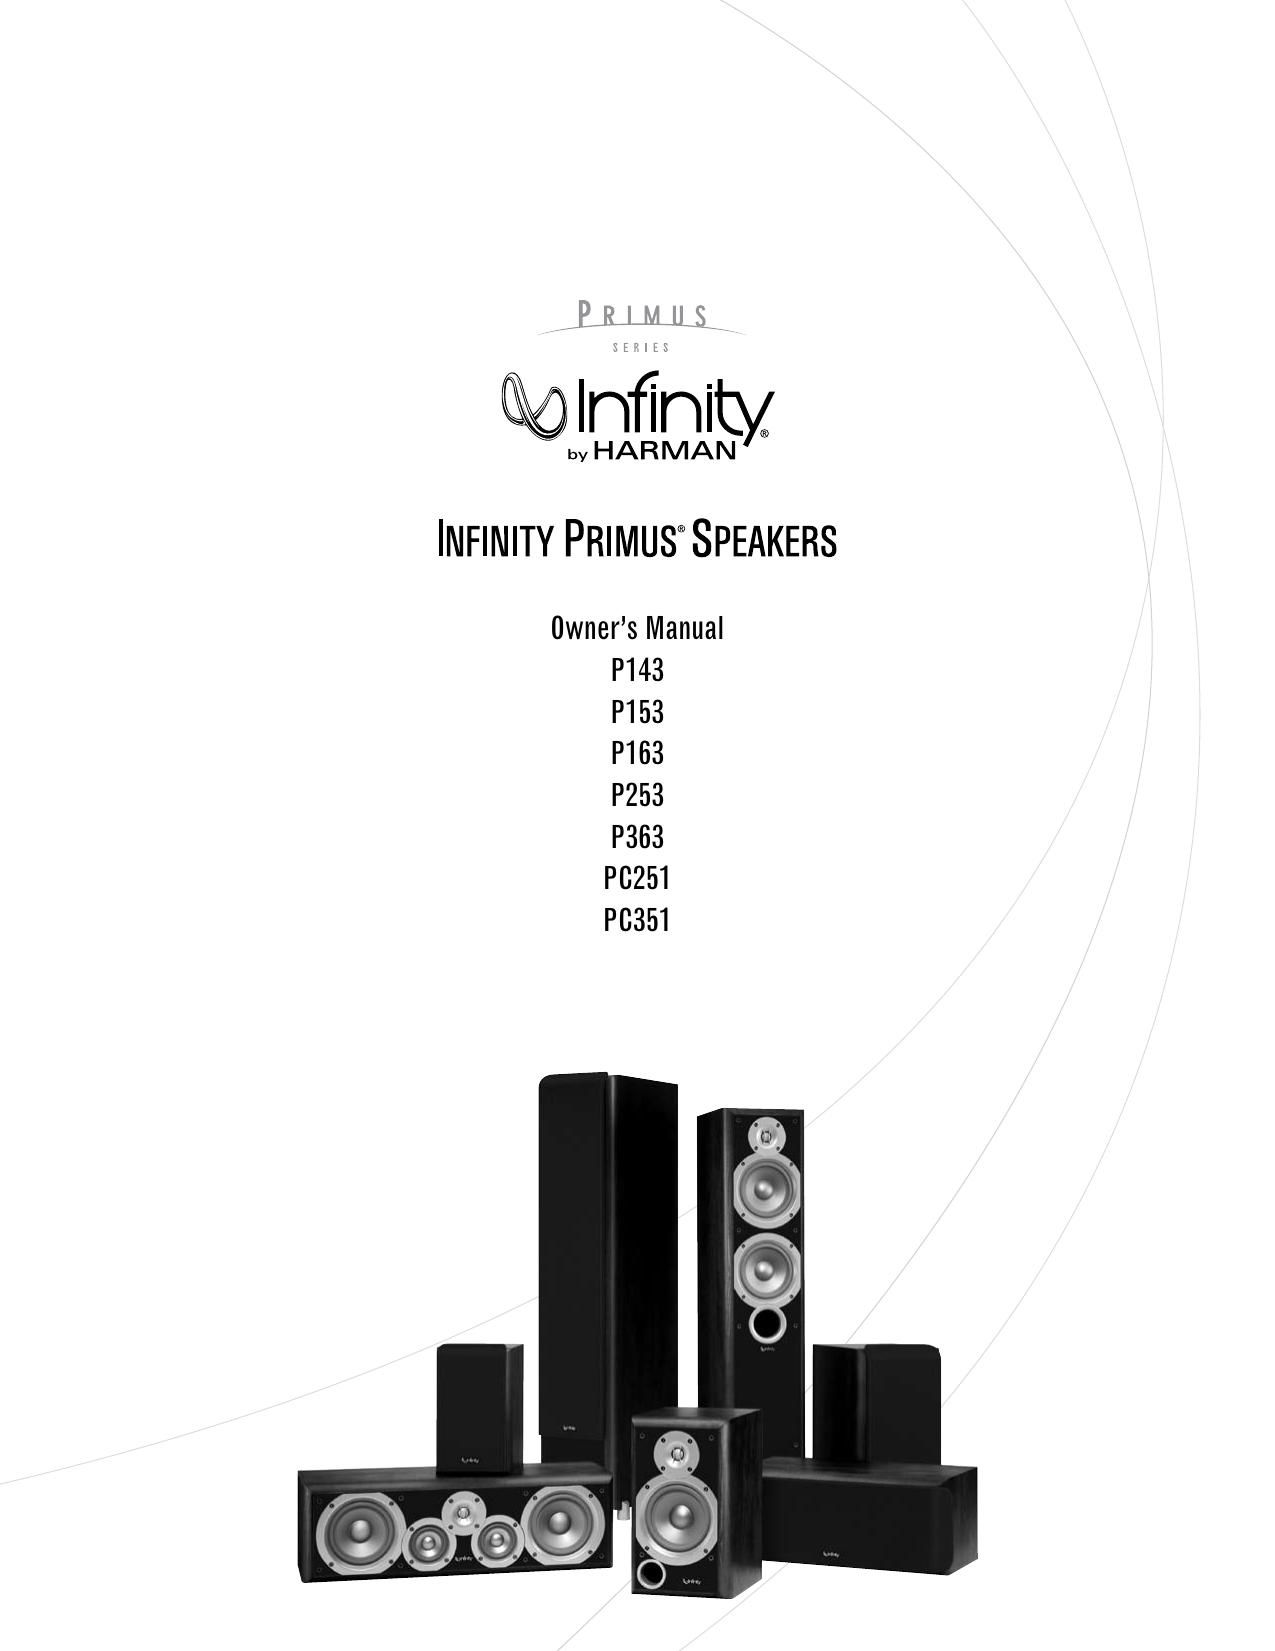 Infinity Primus P 253 Owners Manual